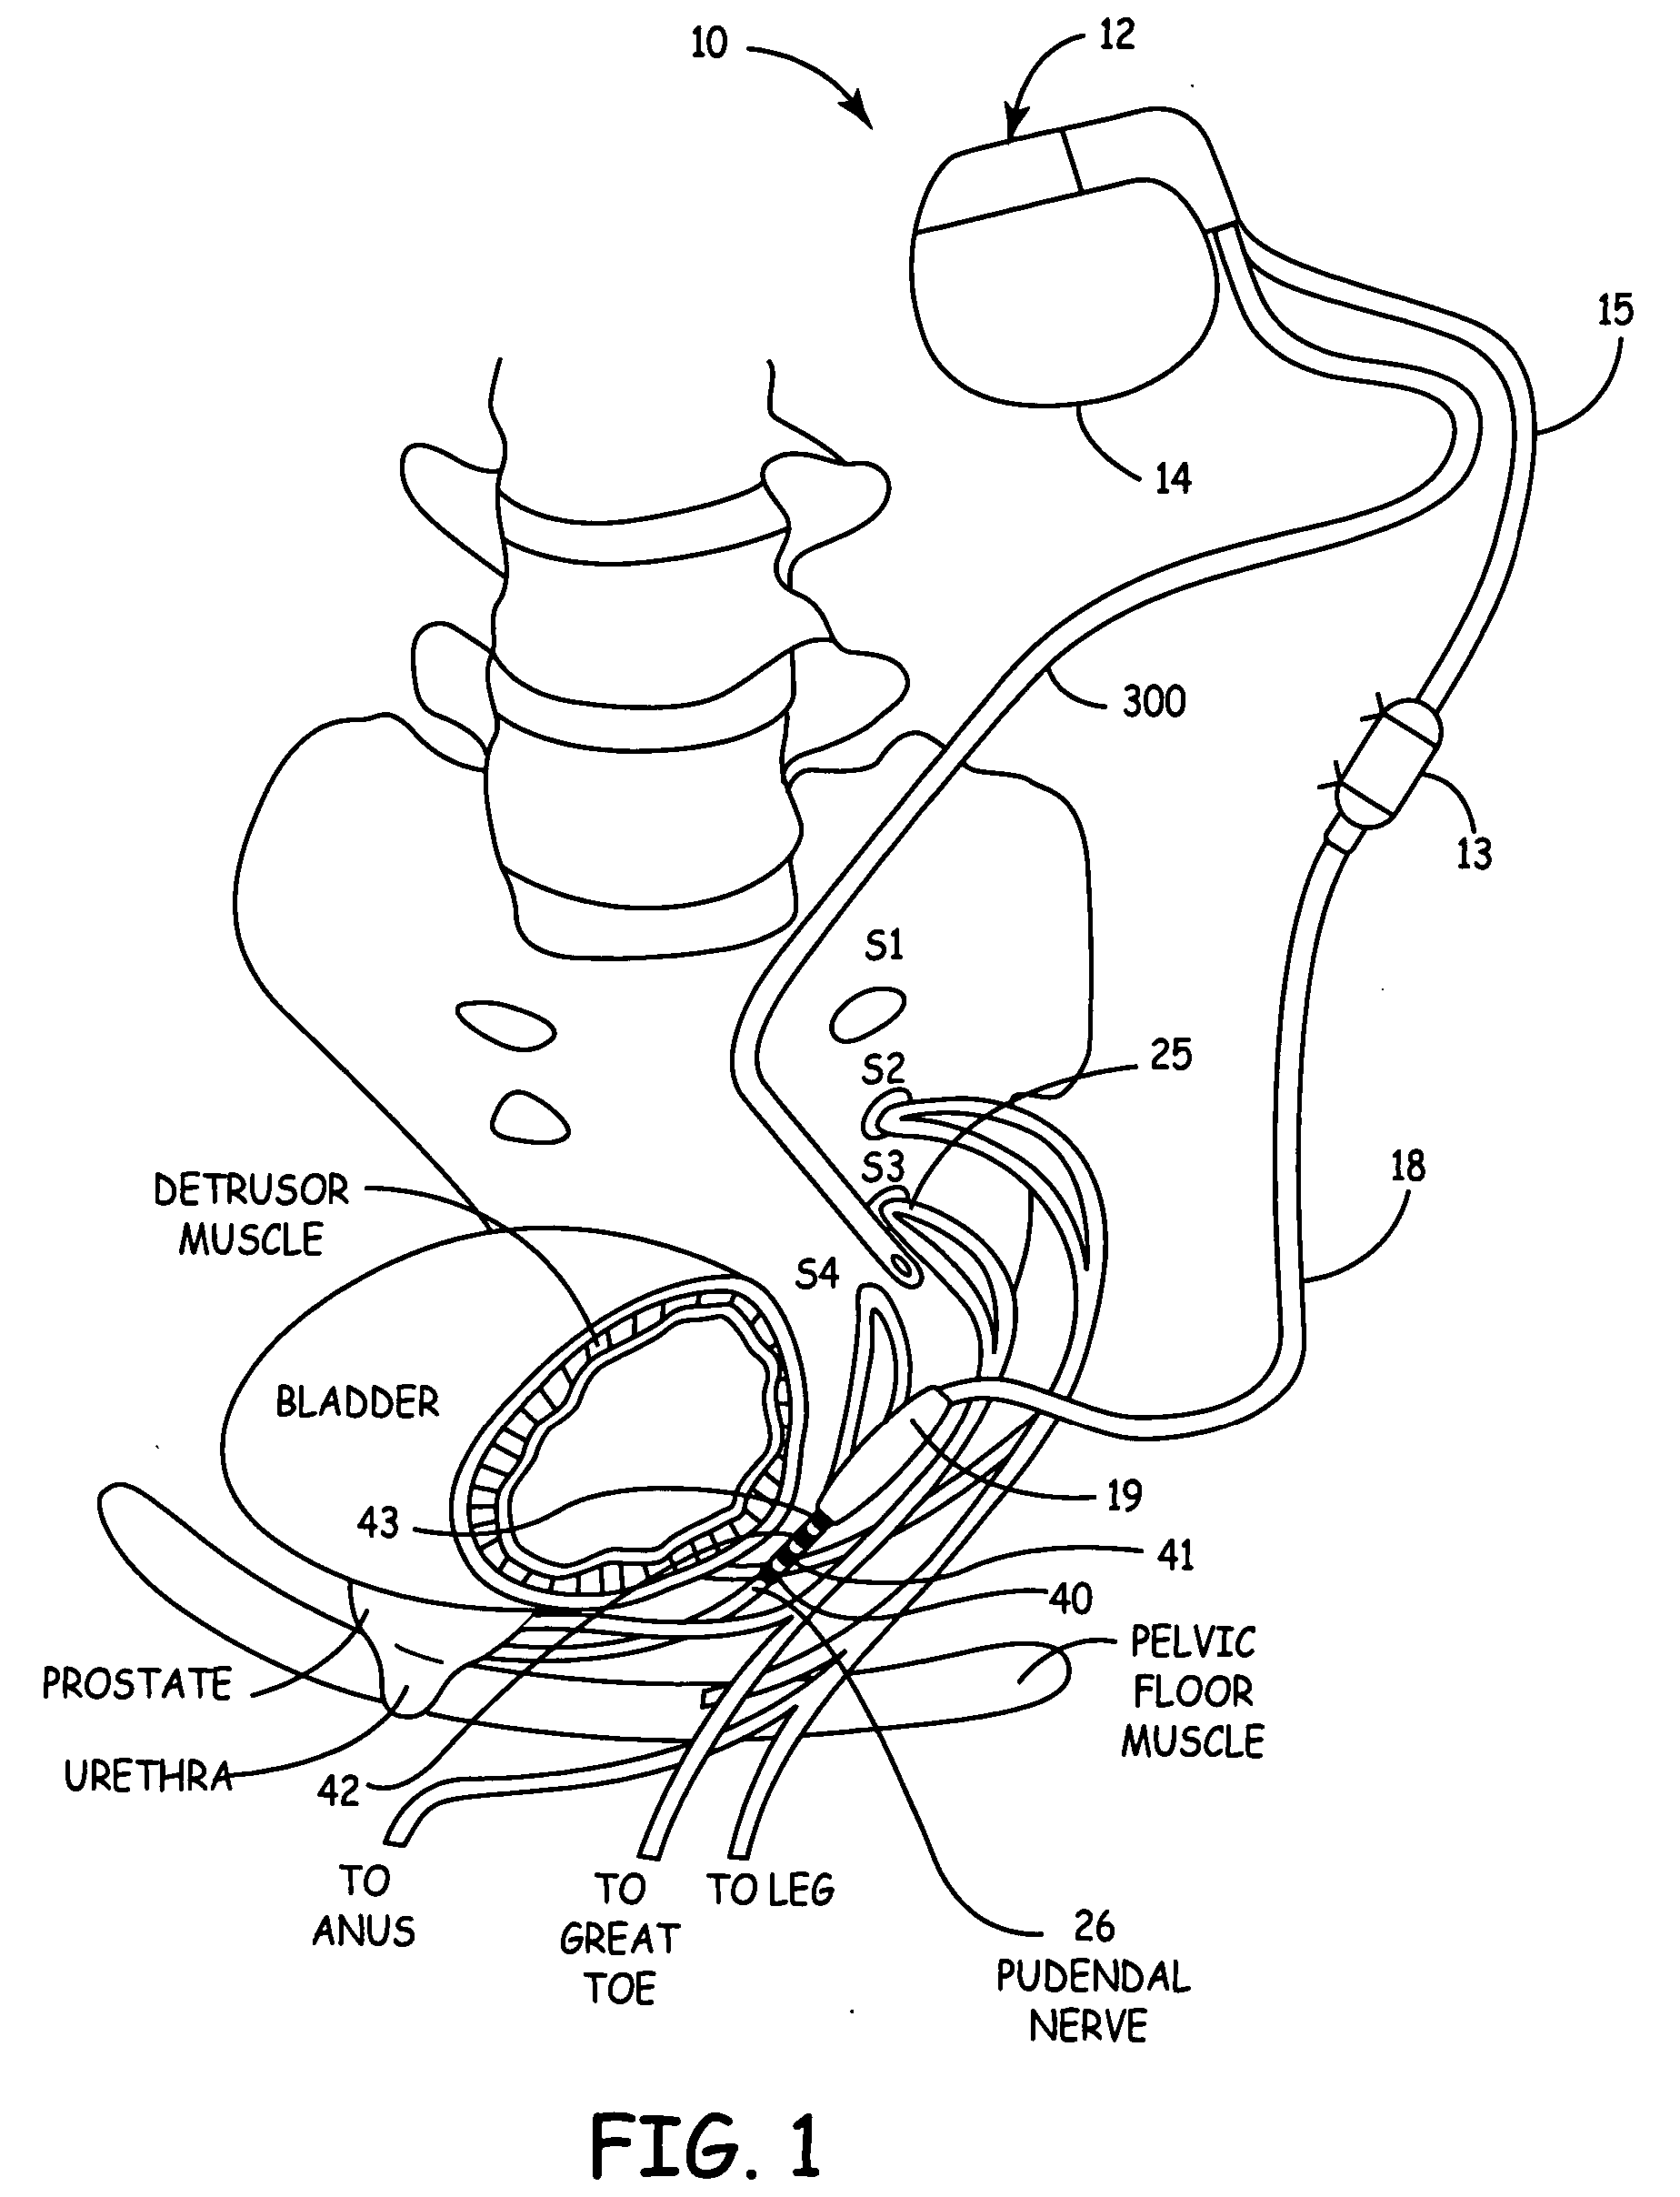 Method, system and device for treating disorders of the pelvic floor by drug delivery to the pudendal and sacral nerves